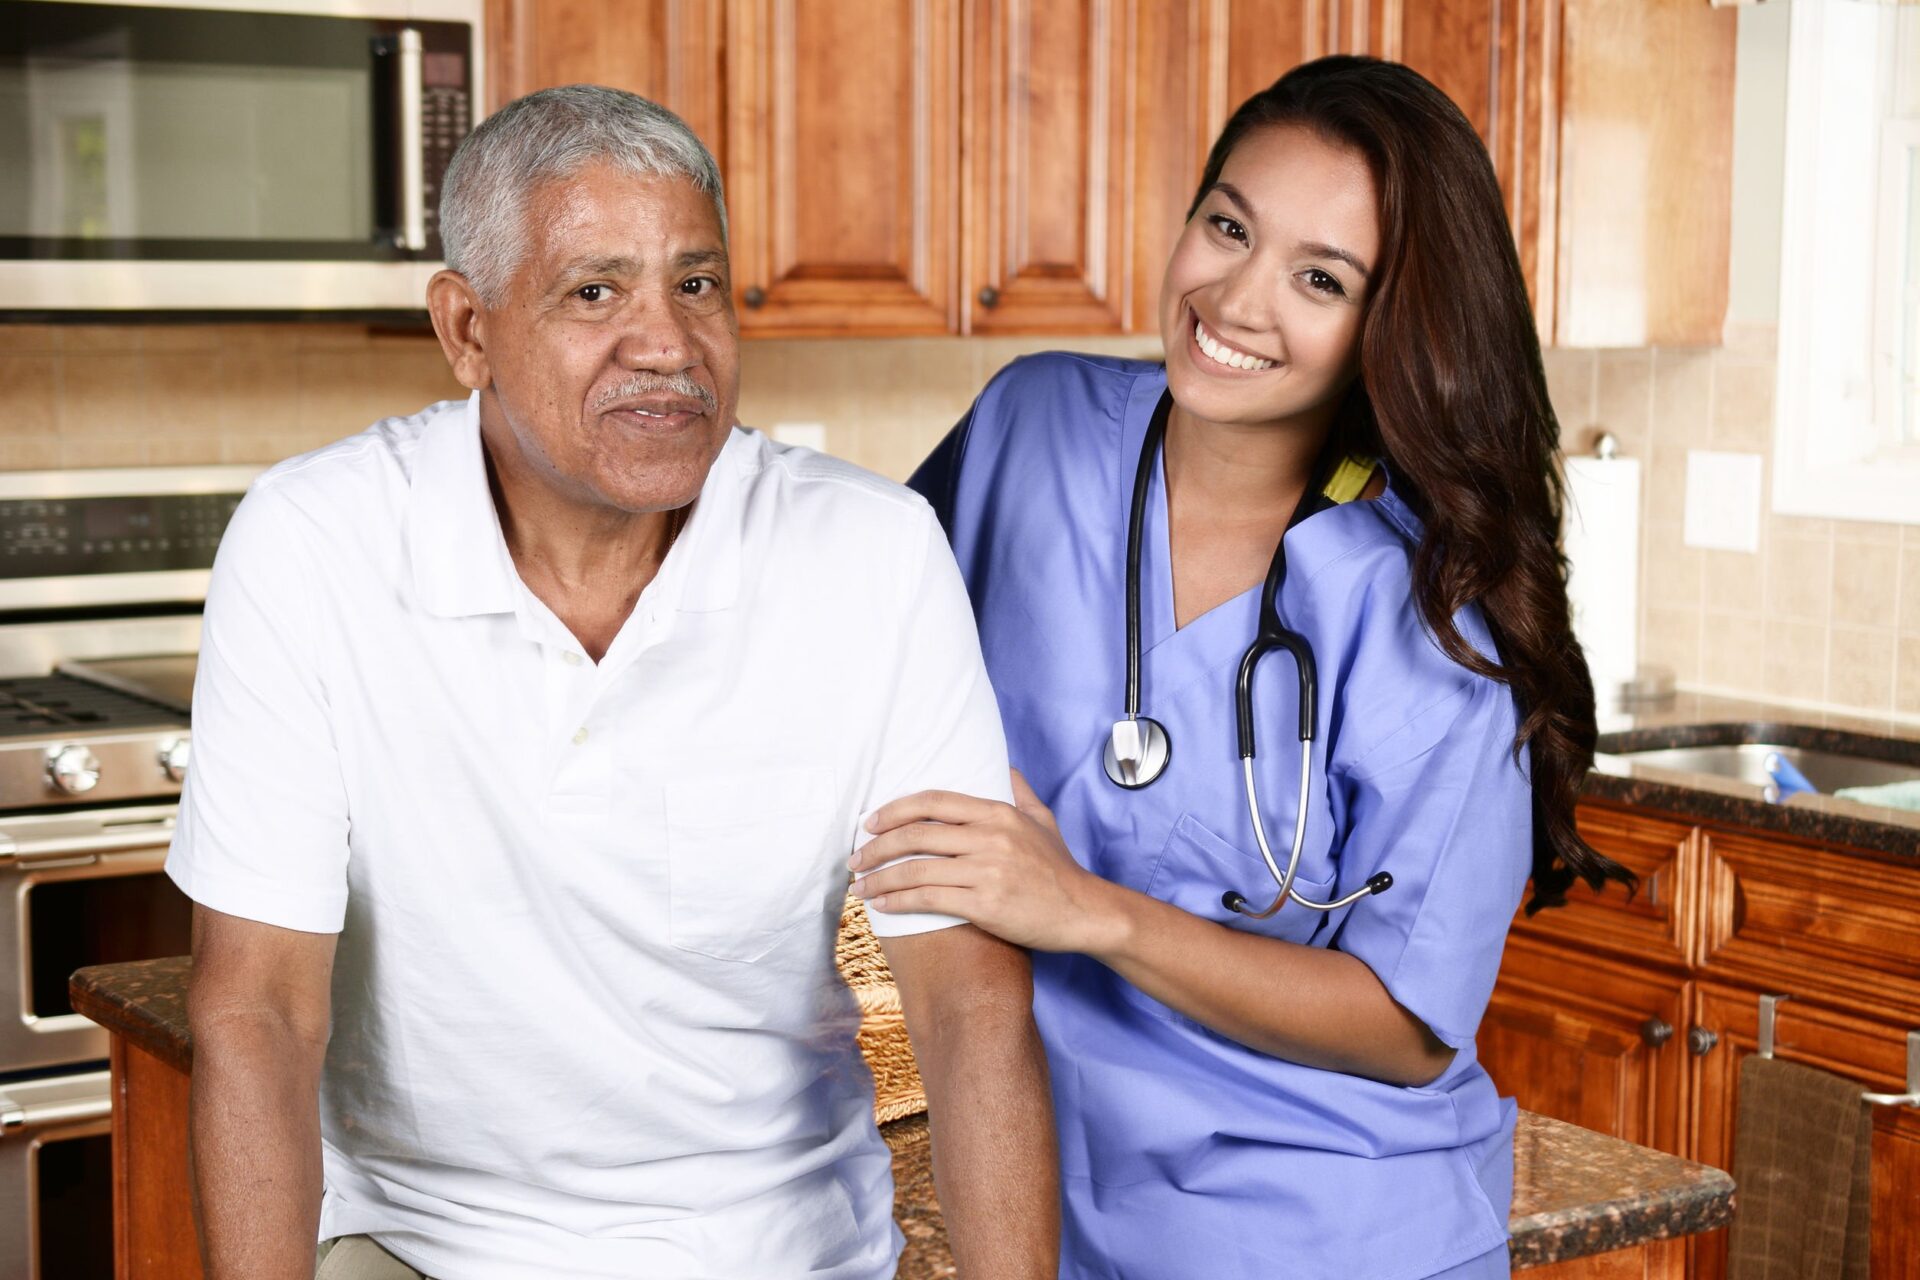 New in 2019! Medicare Advantage Plans Allowed to Offer Personal Care